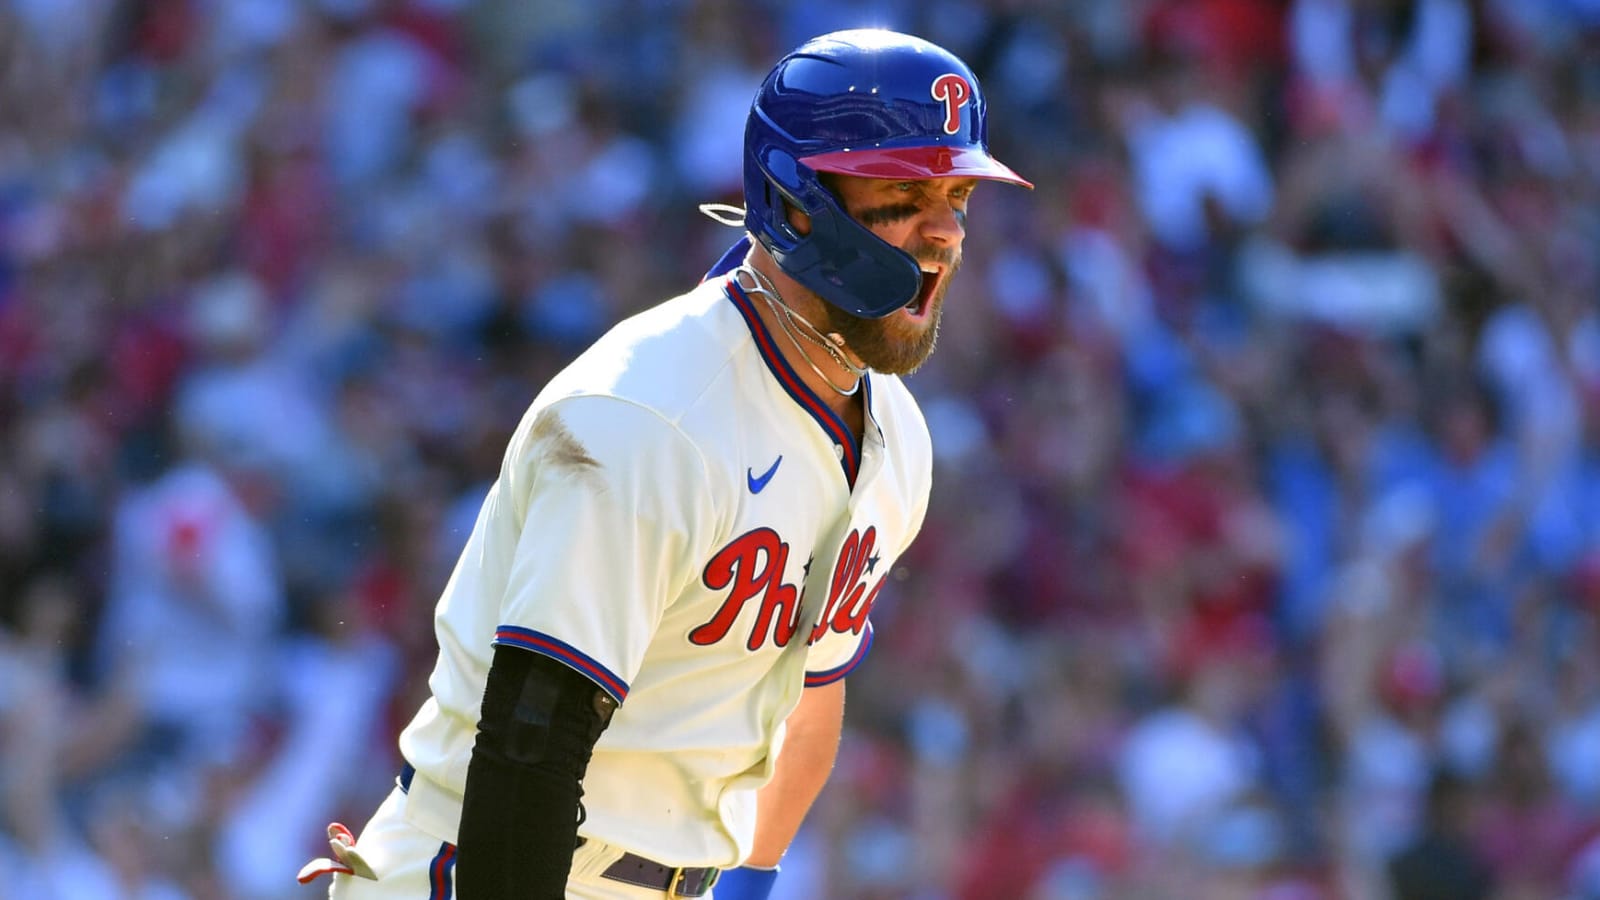 Bryce Harper back in Phillies lineup after three-game absence